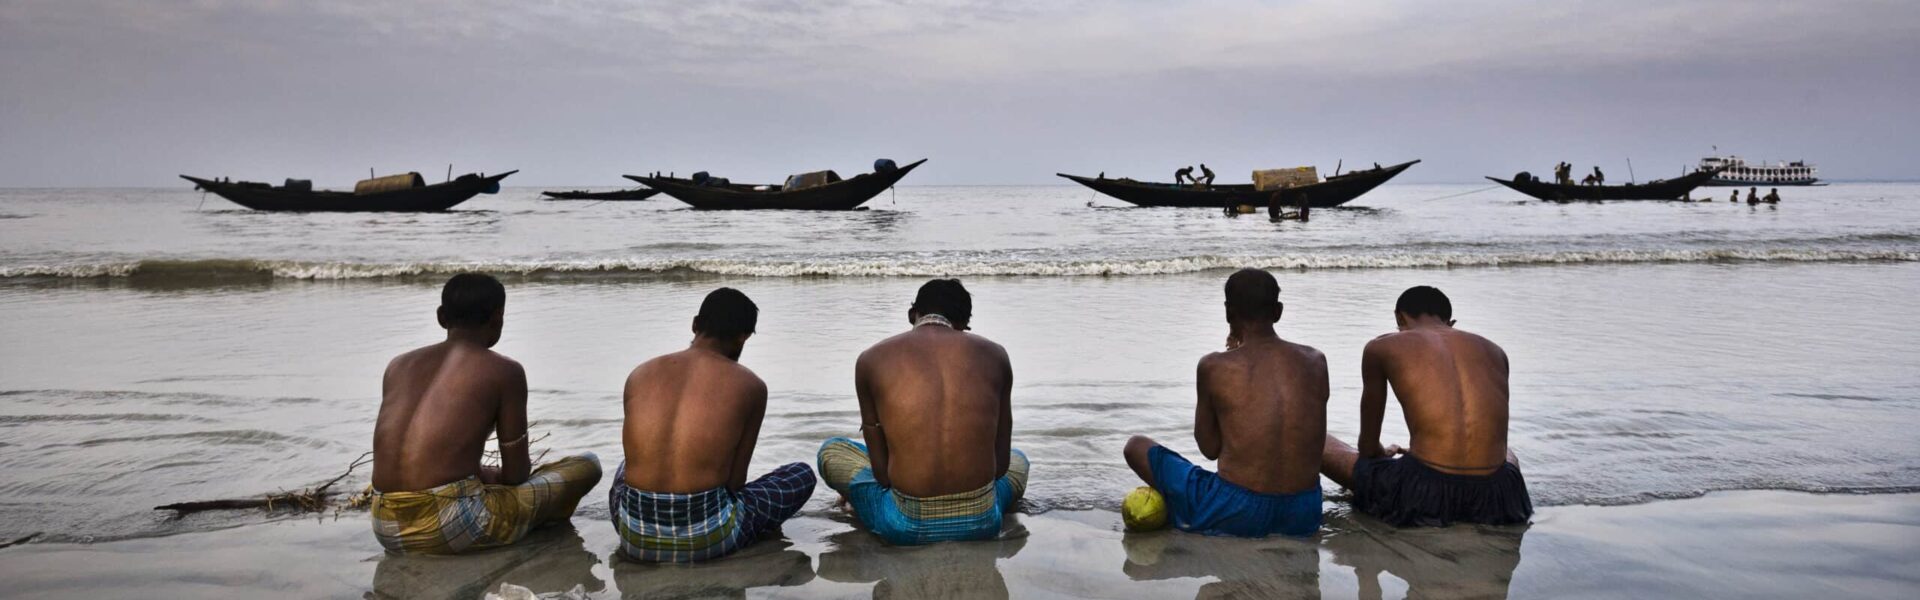 A row of men seated on the wet sand at low tide, praying for a benevolent sea, before going fishing, after one of the strongest cyclones to hit the country killed thousands of fishermen at sea.